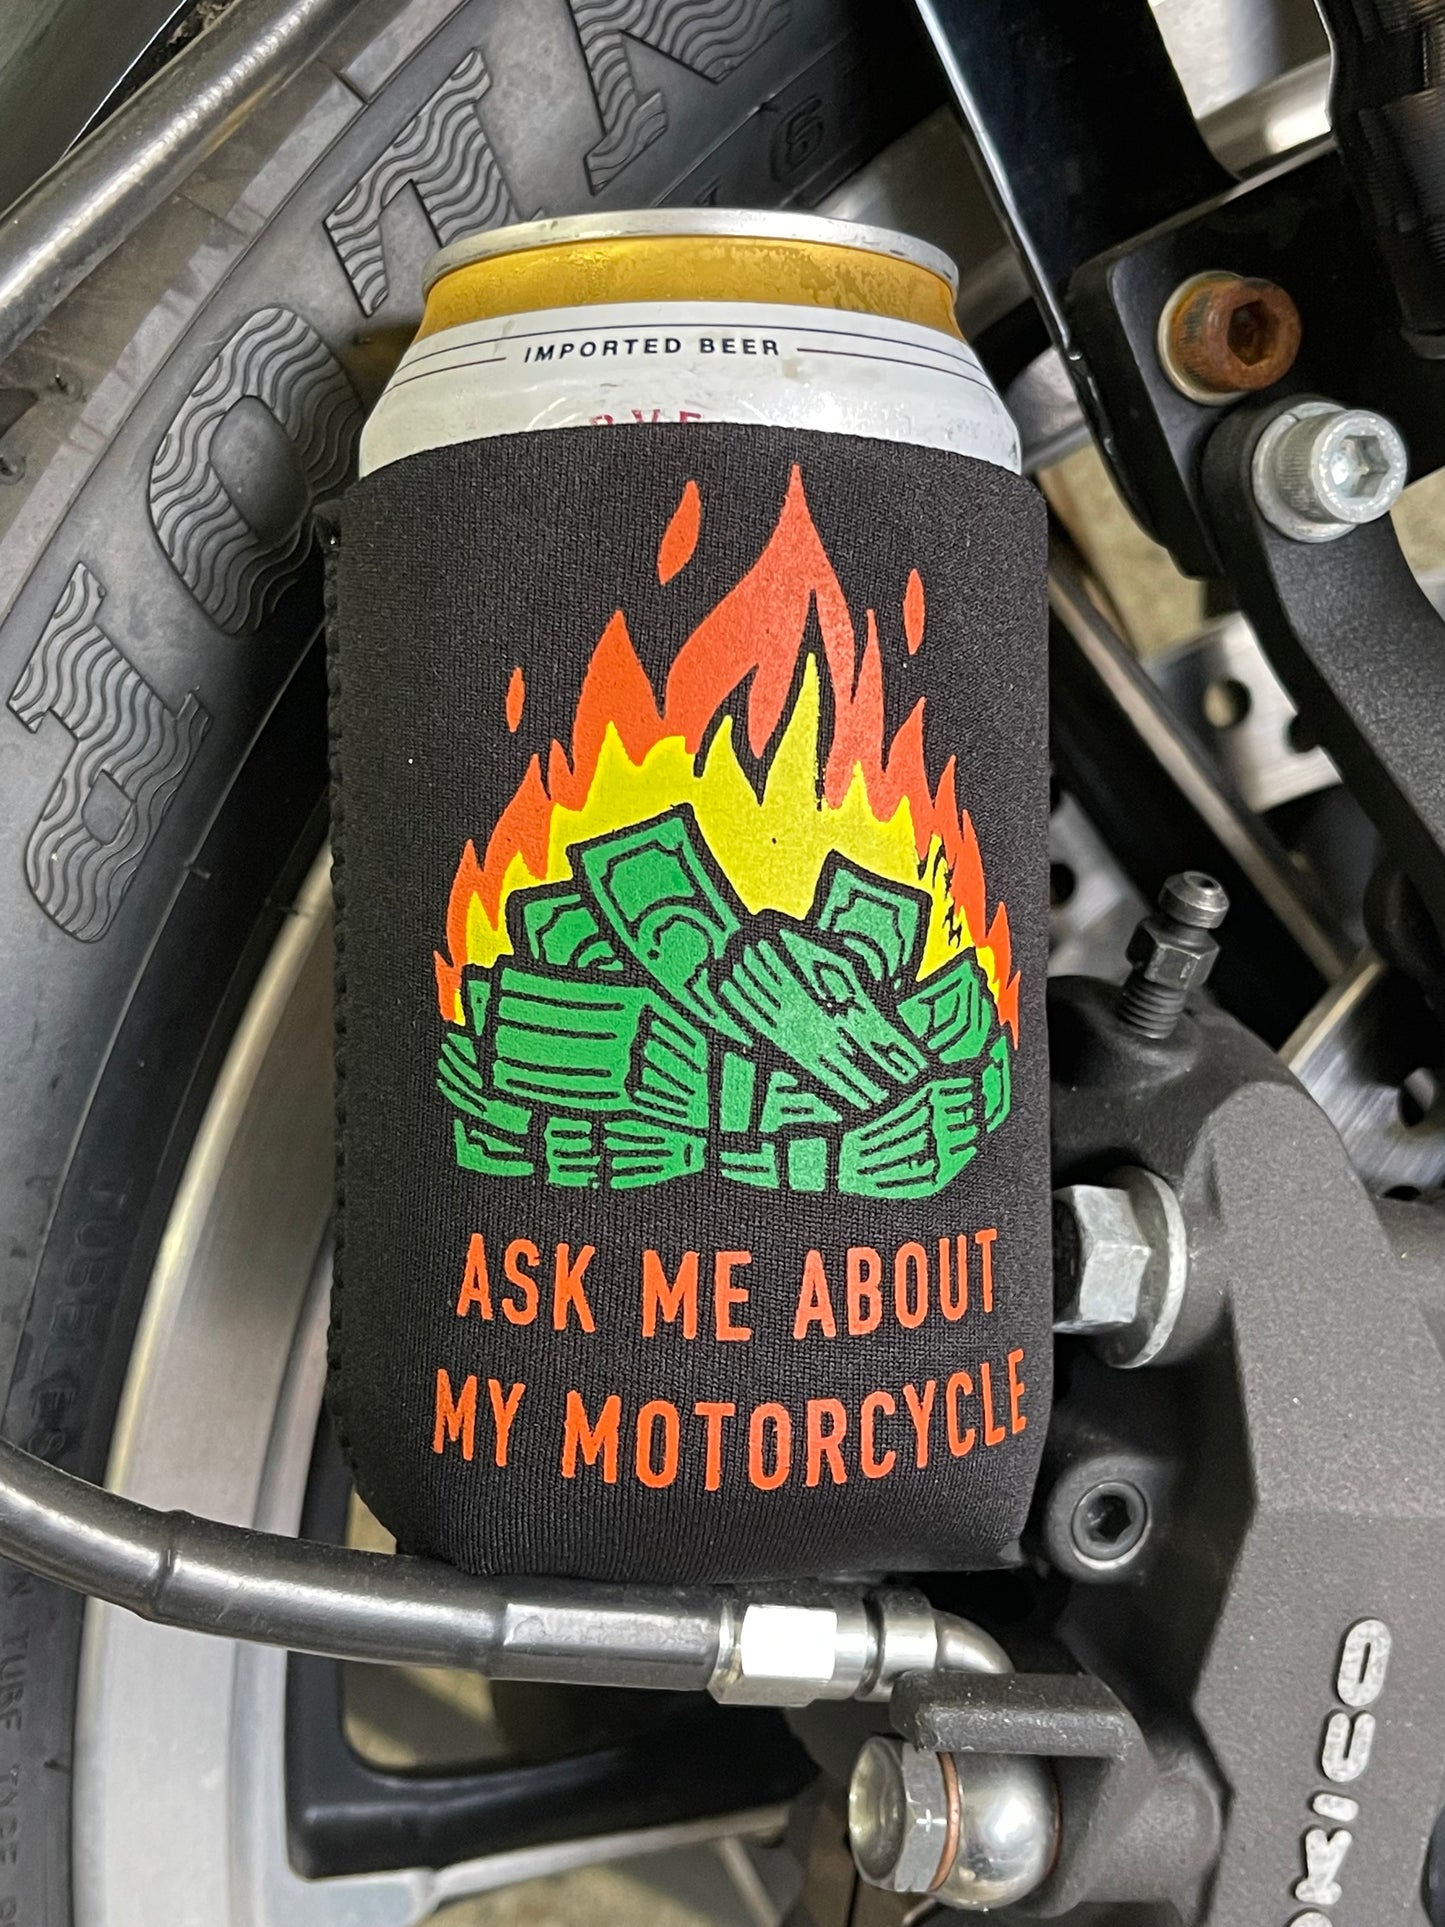 ASK ME ABOUT MY MOTORCYCLE - KOOZIE